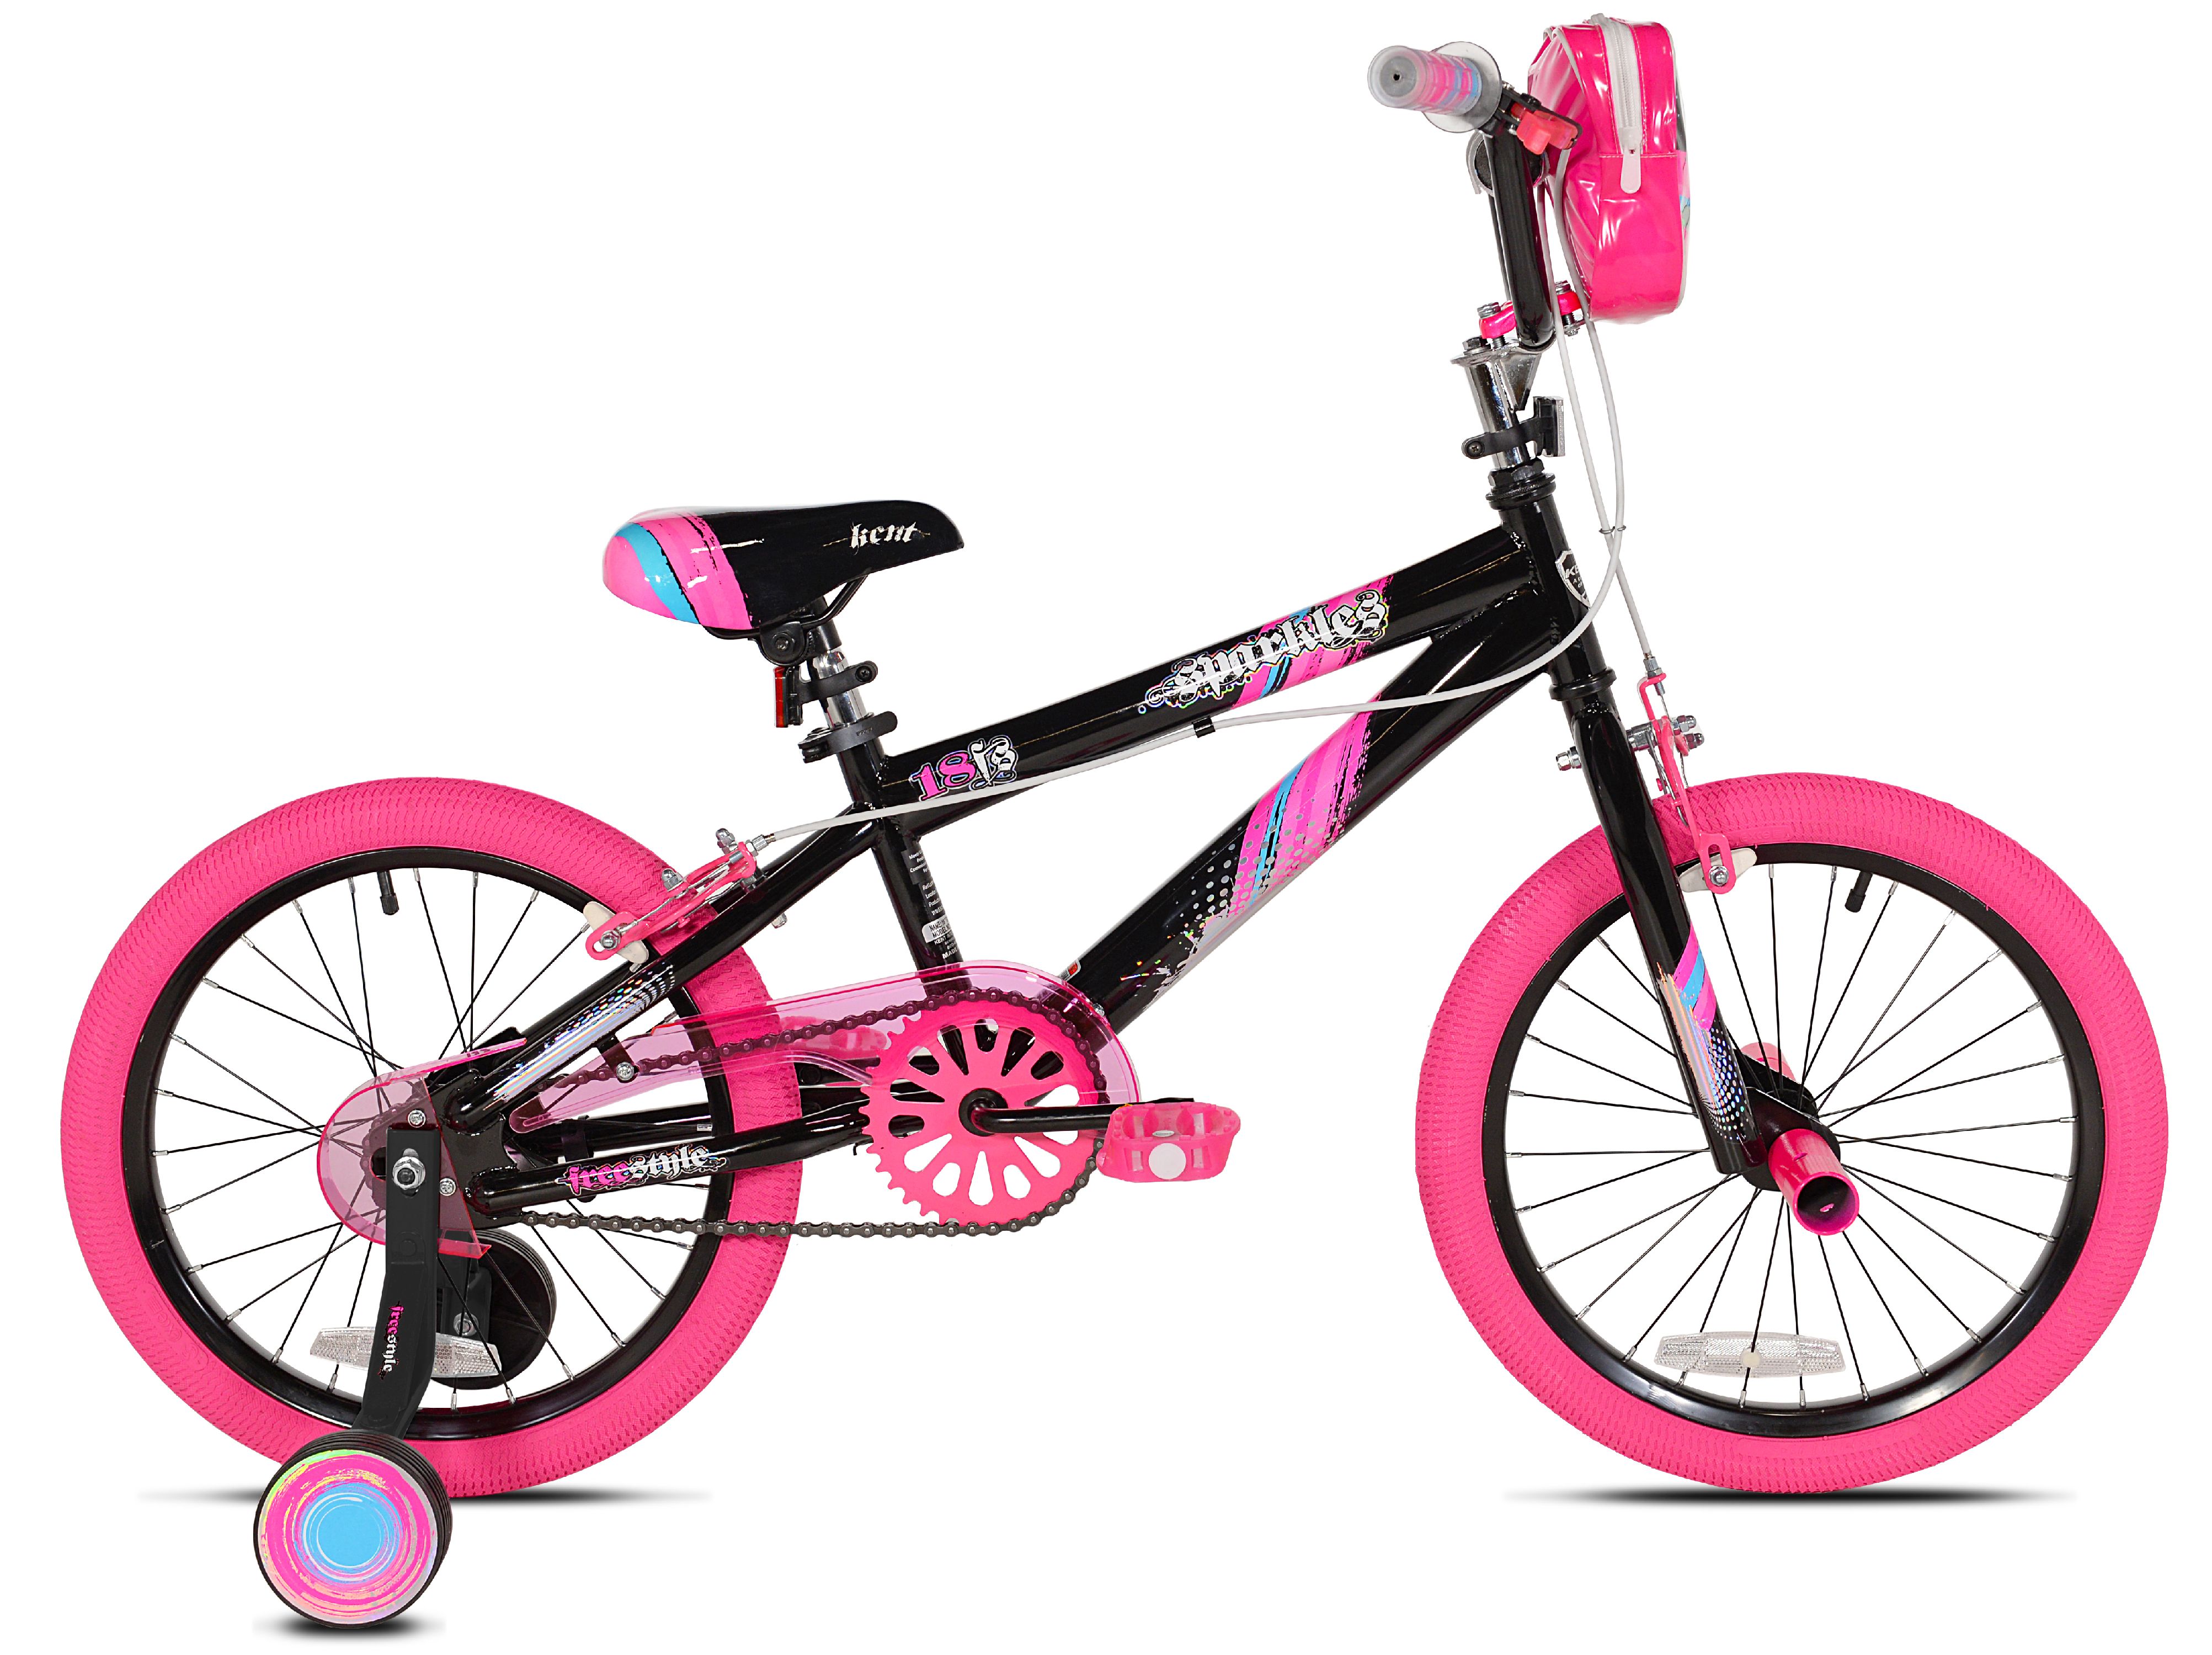 Kent Bicycles 18 inch Girl's Sparkles Bicycle, Black and Pink - image 3 of 10